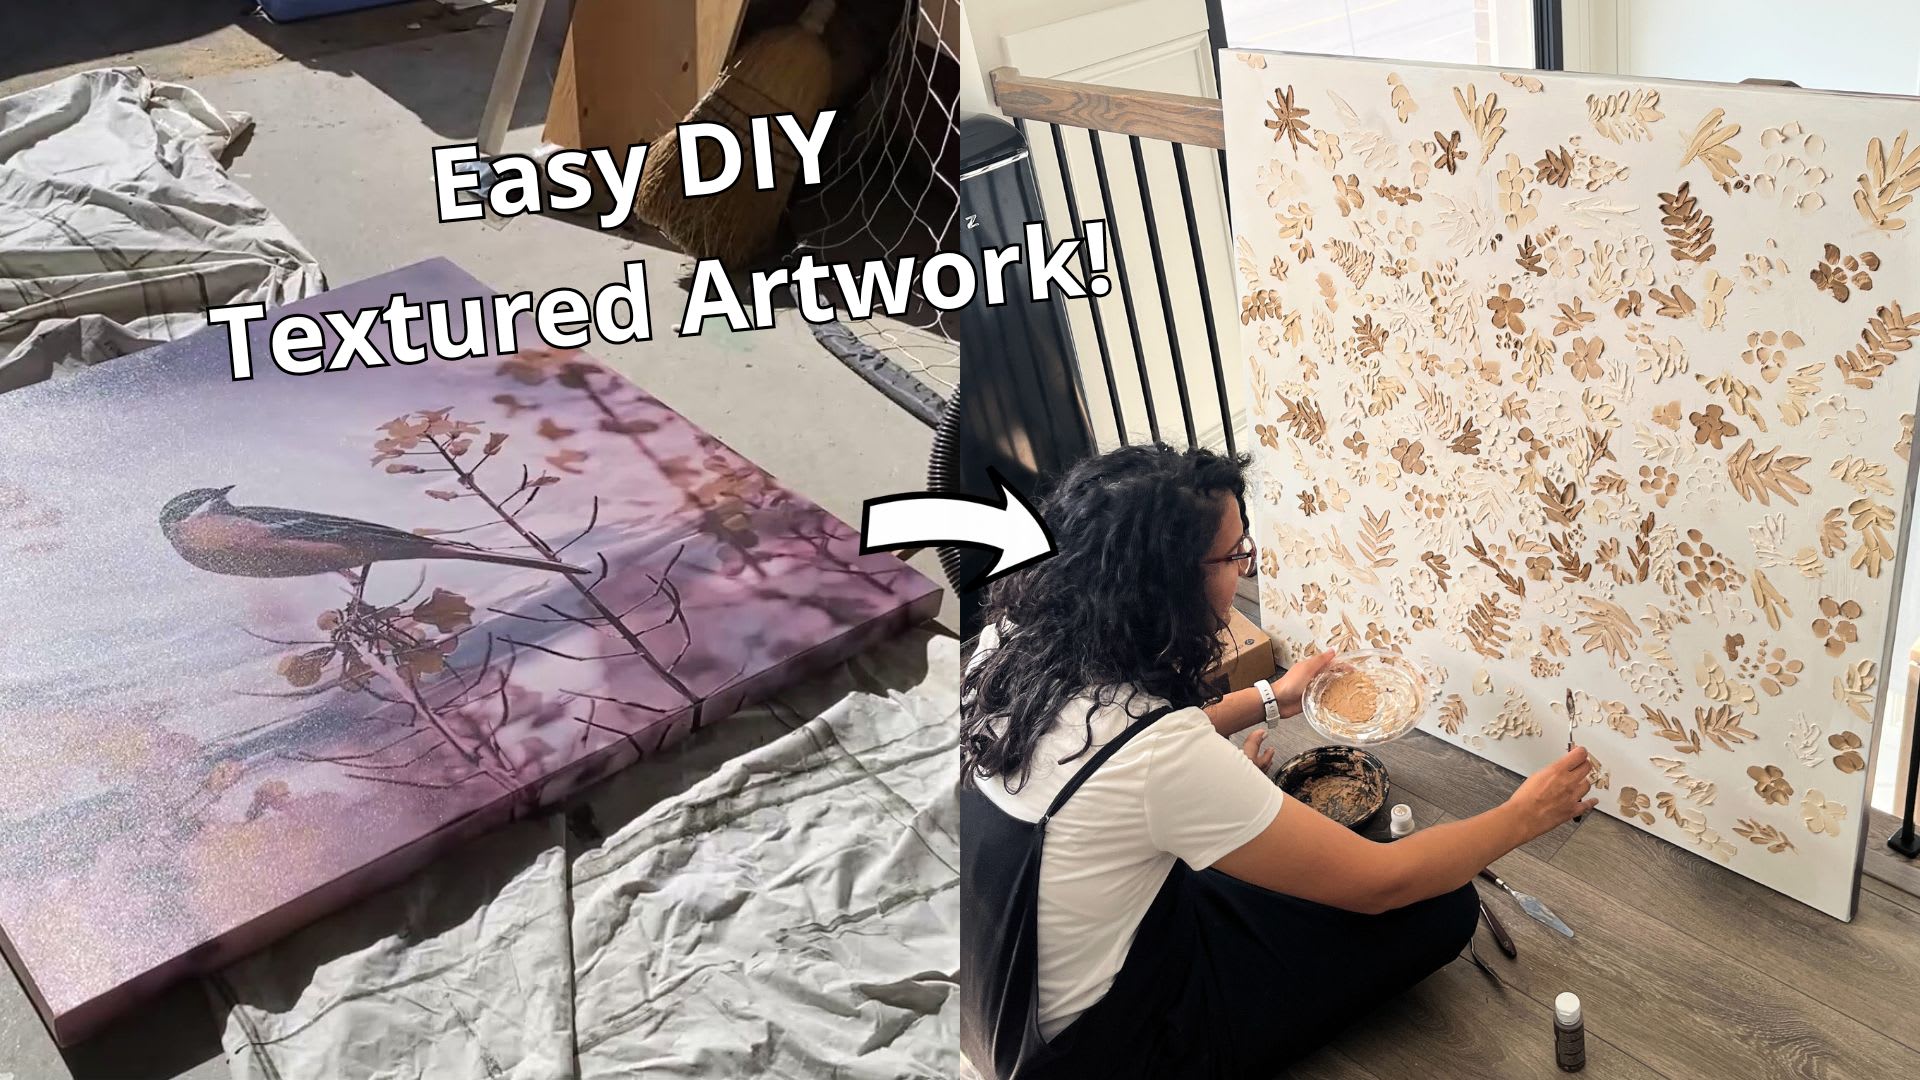 How to Make DIY Textured Art - The Home Depot